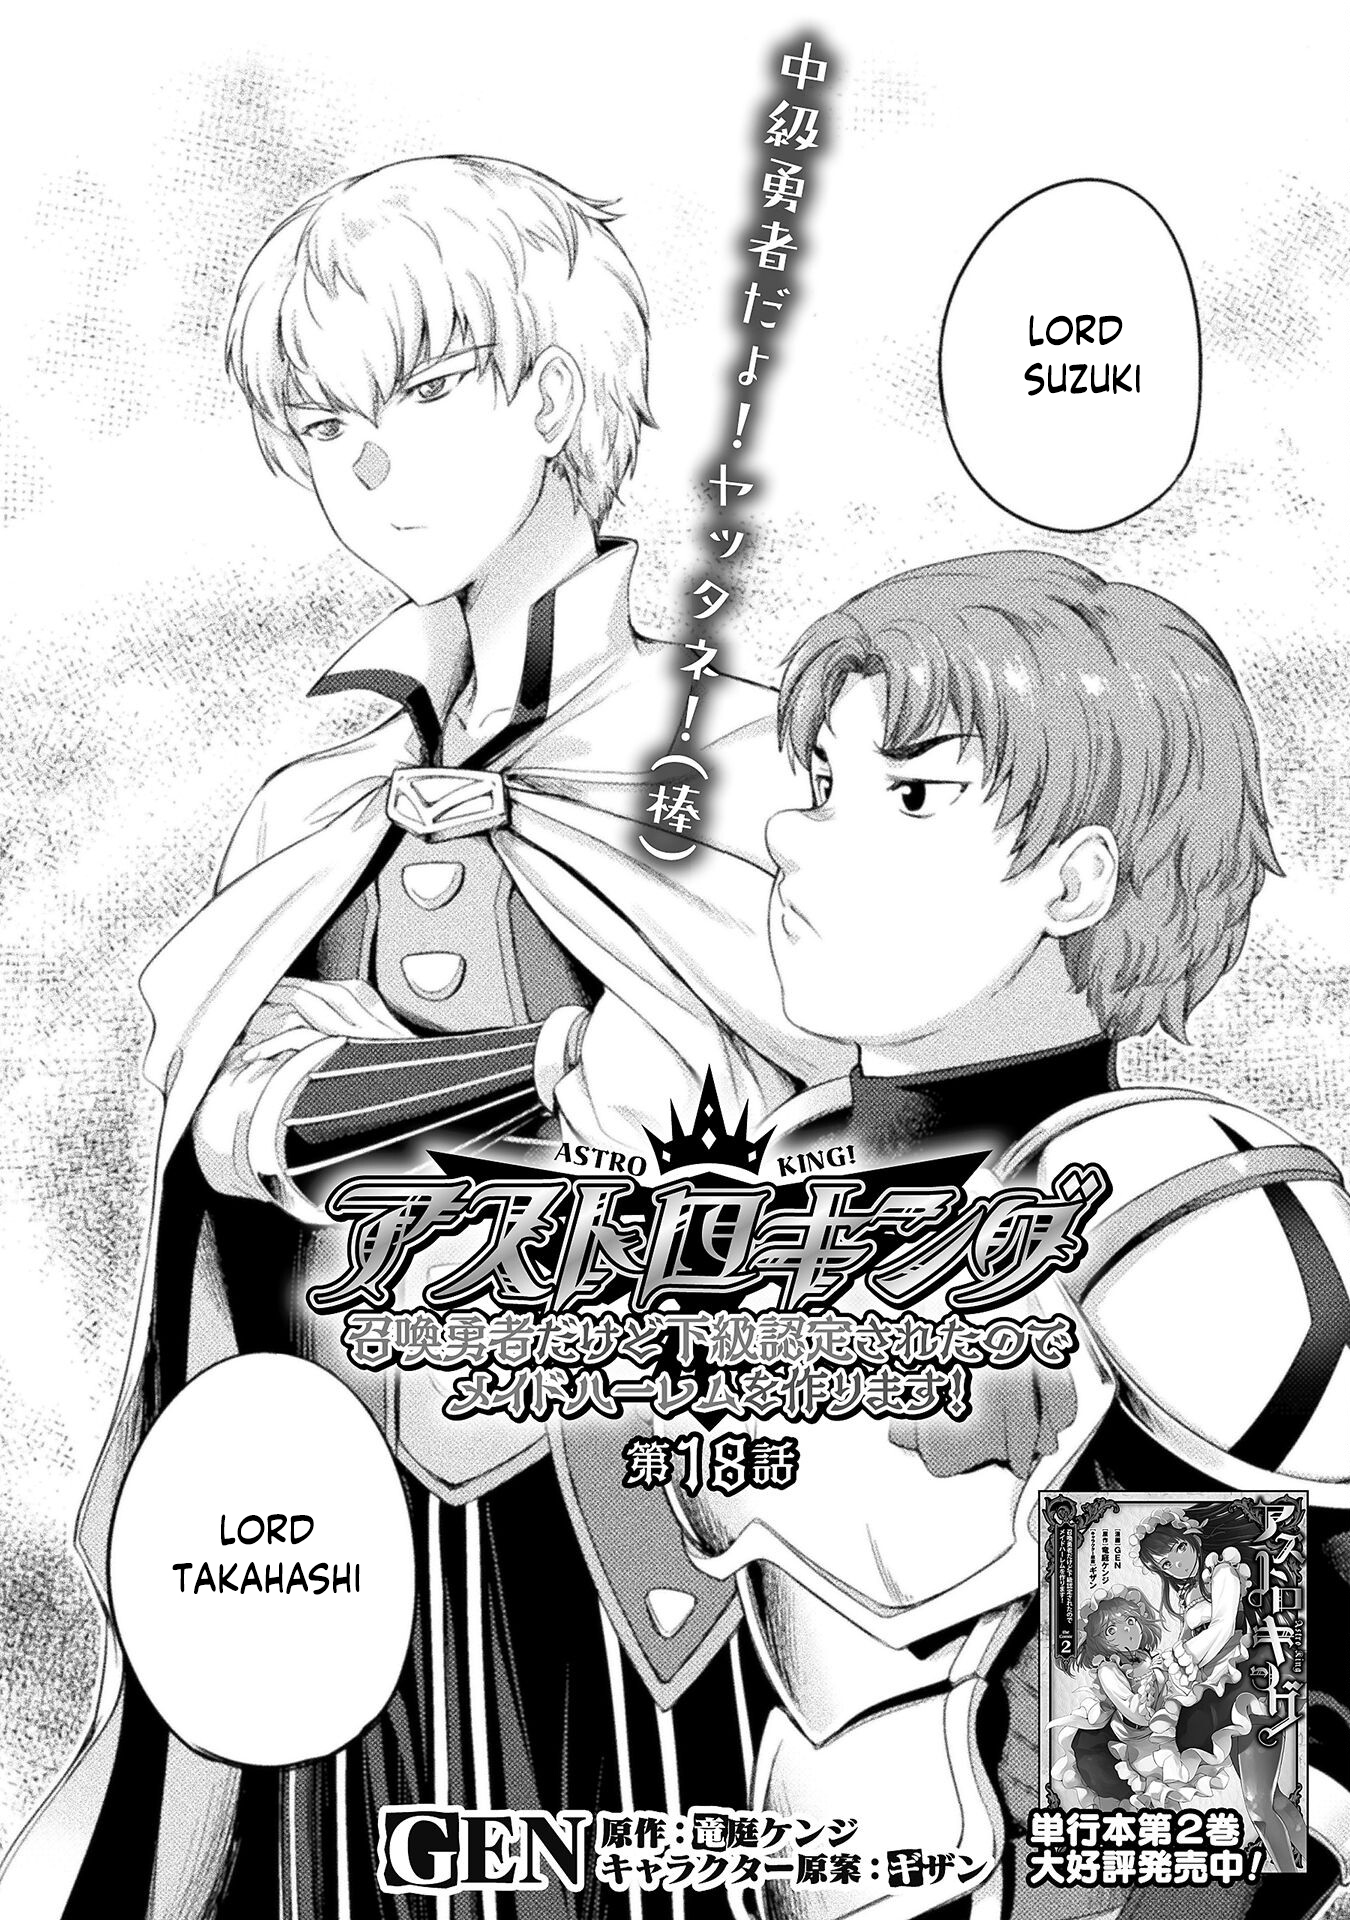 Astro King - Summoned as a Hero, I Turned Out to Be Low Rank, so I Made a Maid Harem! - chapter 18 - #3